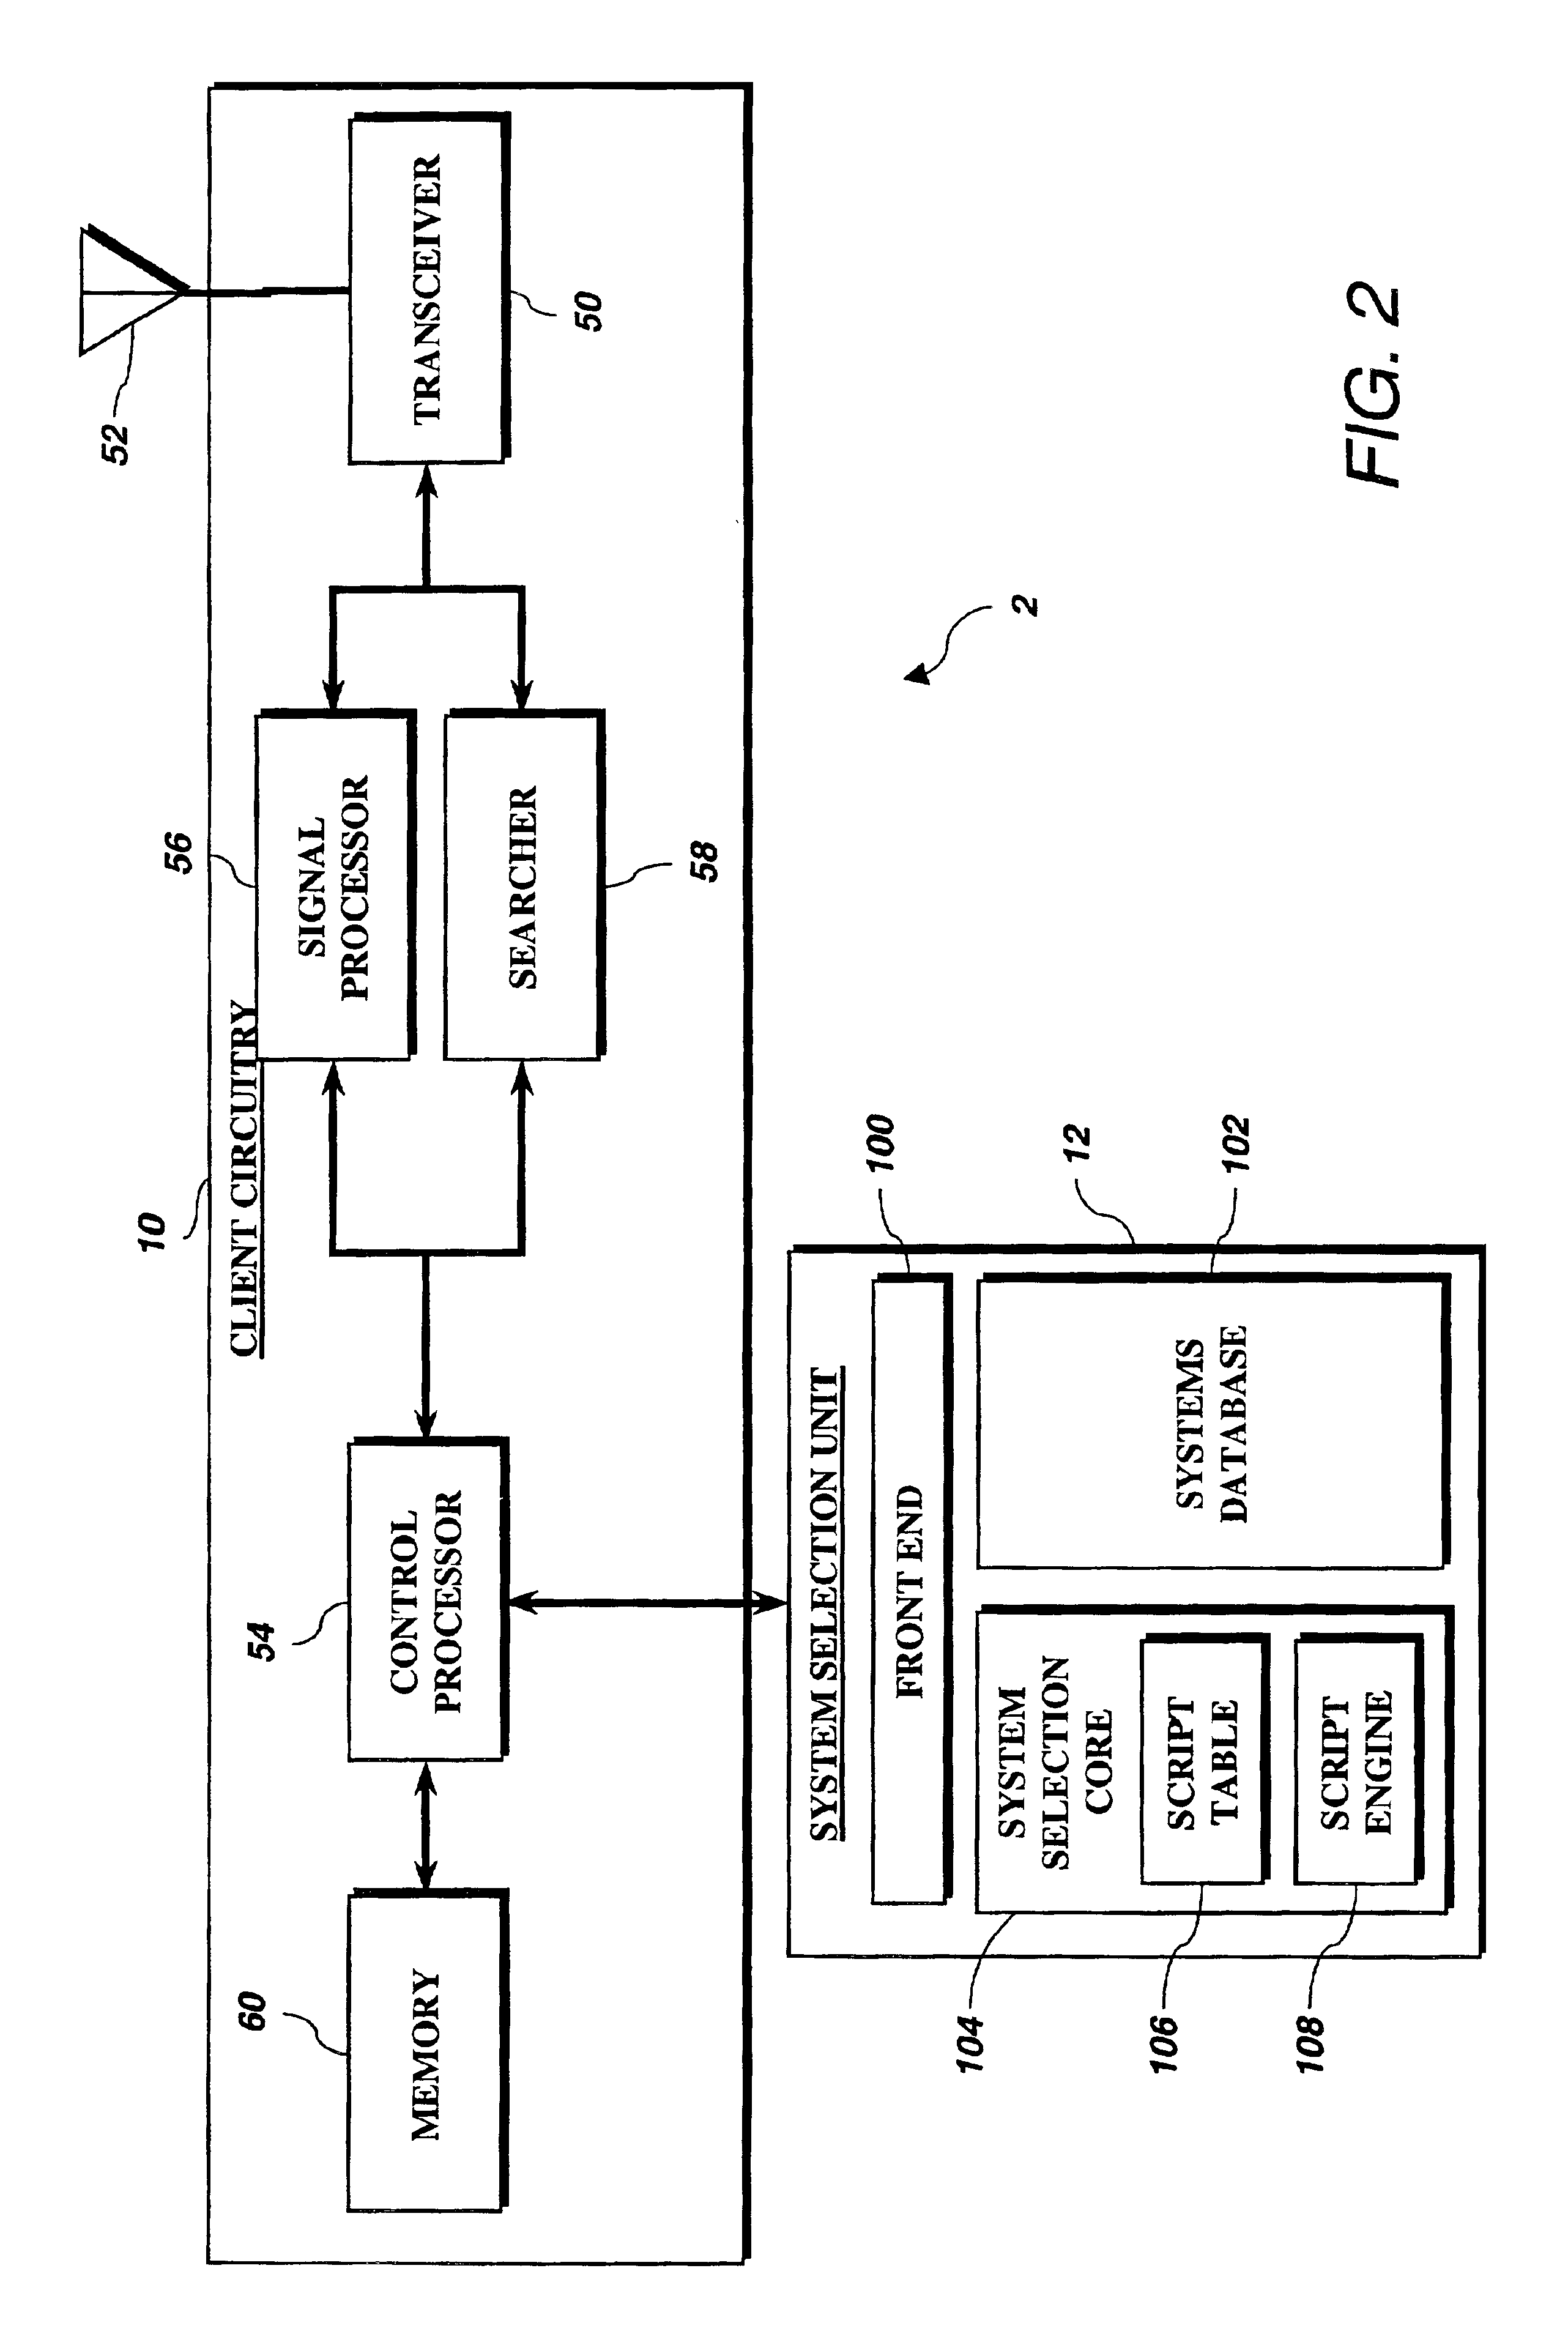 Method and apparatus for configurable selection and acquisition of a wireless communications system